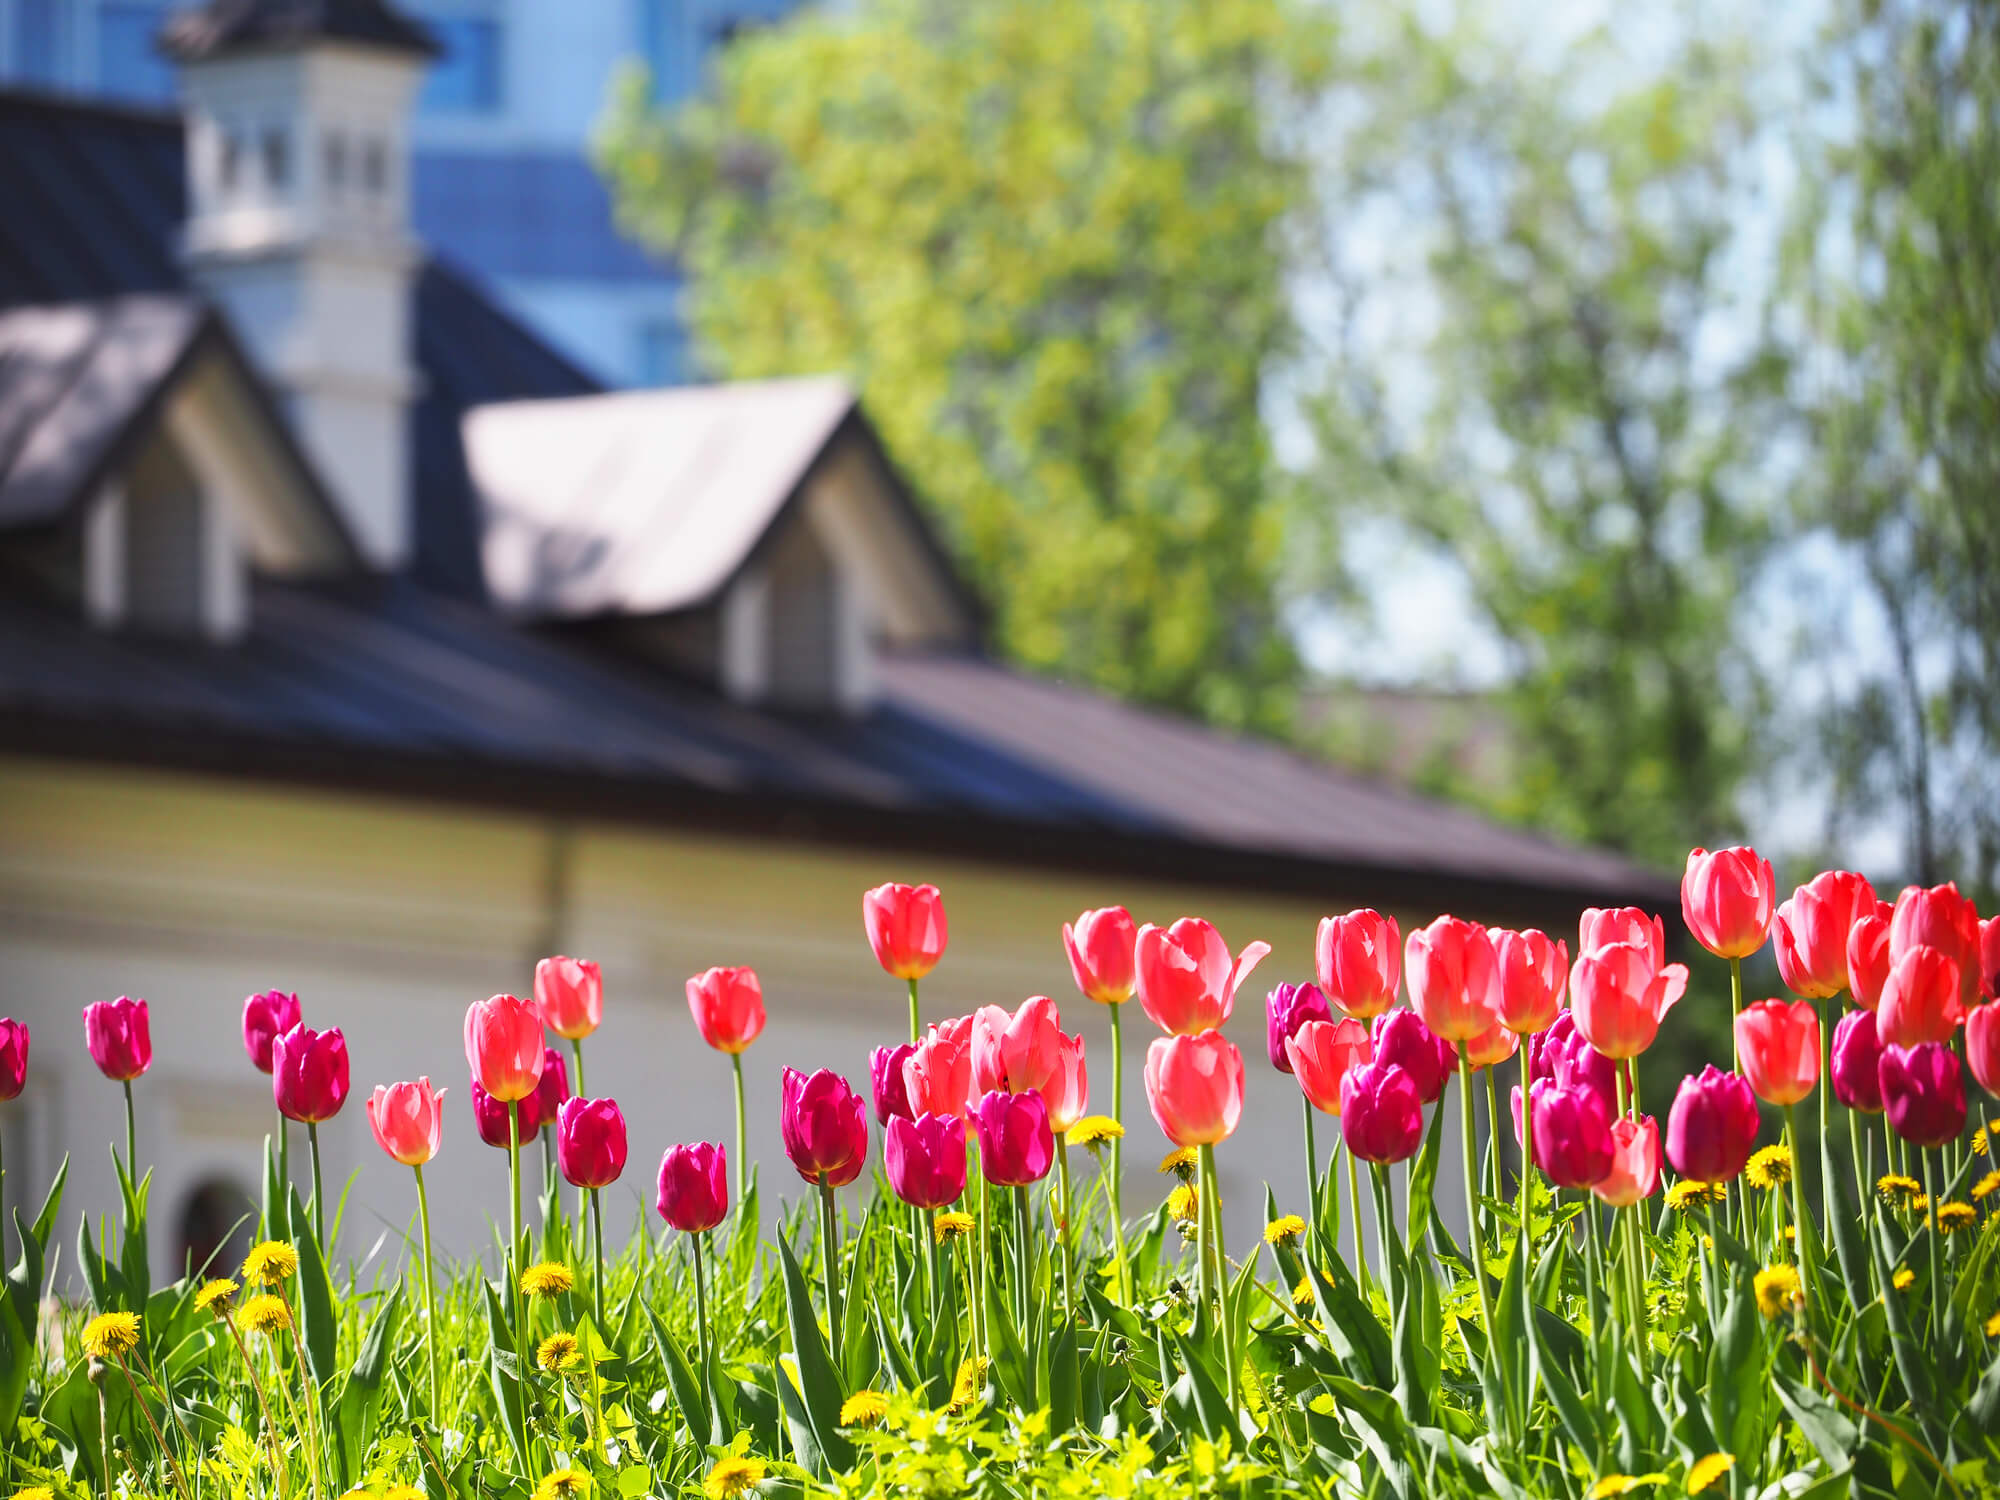 A flower bed with pink and purple tulips in the rays of sunlight against the backdrop of a beautiful white house with a sloping roof